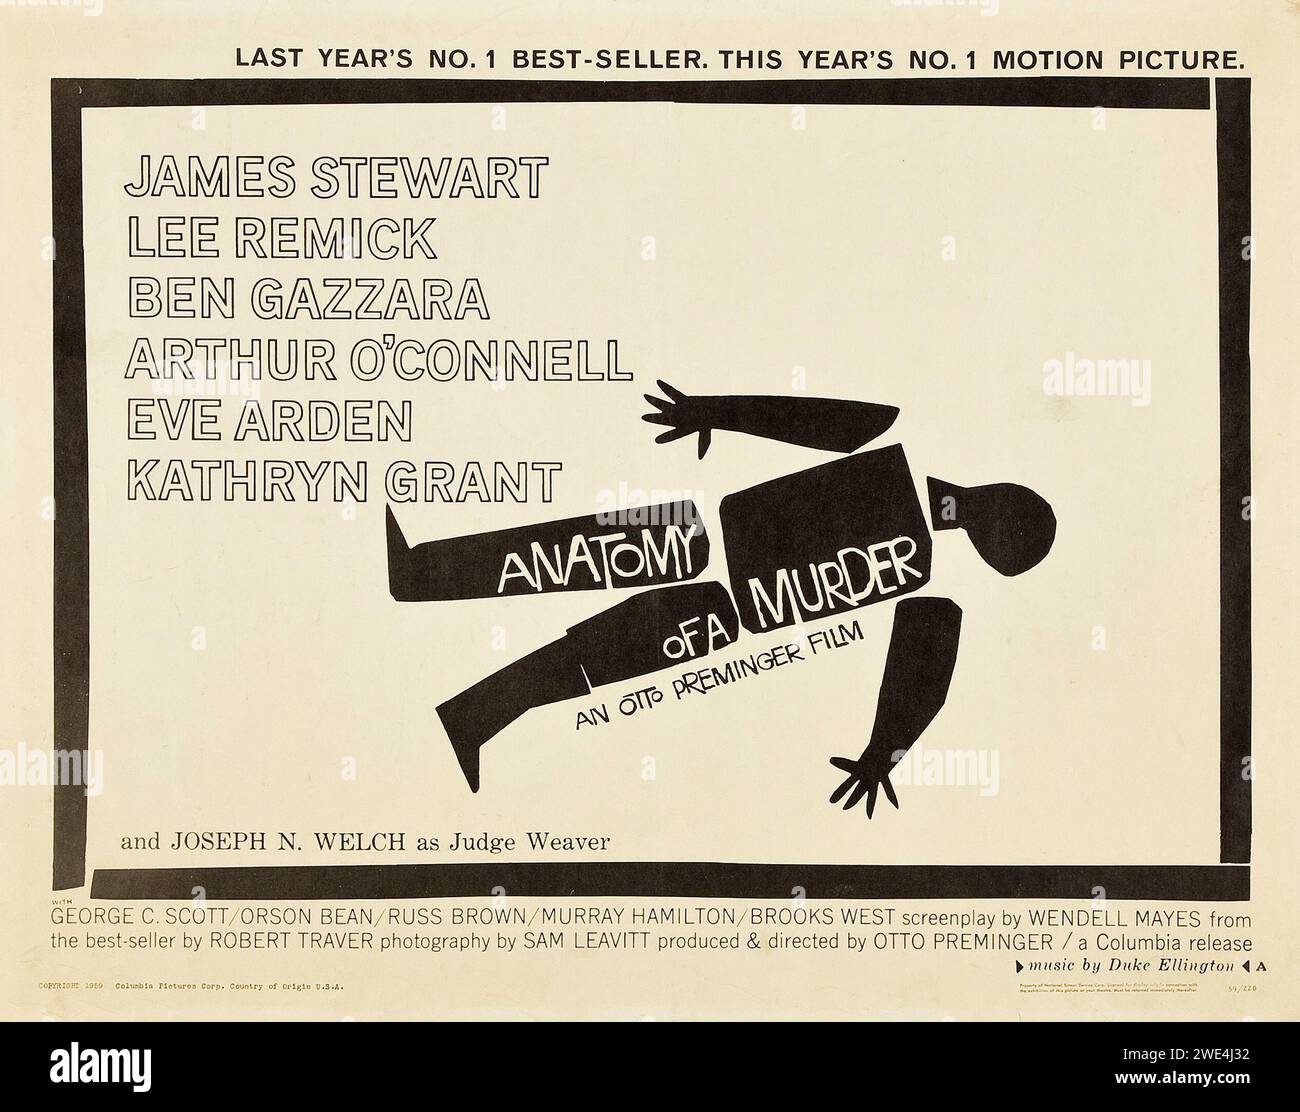 Anatomy of a Murder (Columbia, 1959) vintage film poster - Alfred Hitchcock - James Stewart, Lee Remick - style A Stock Photo